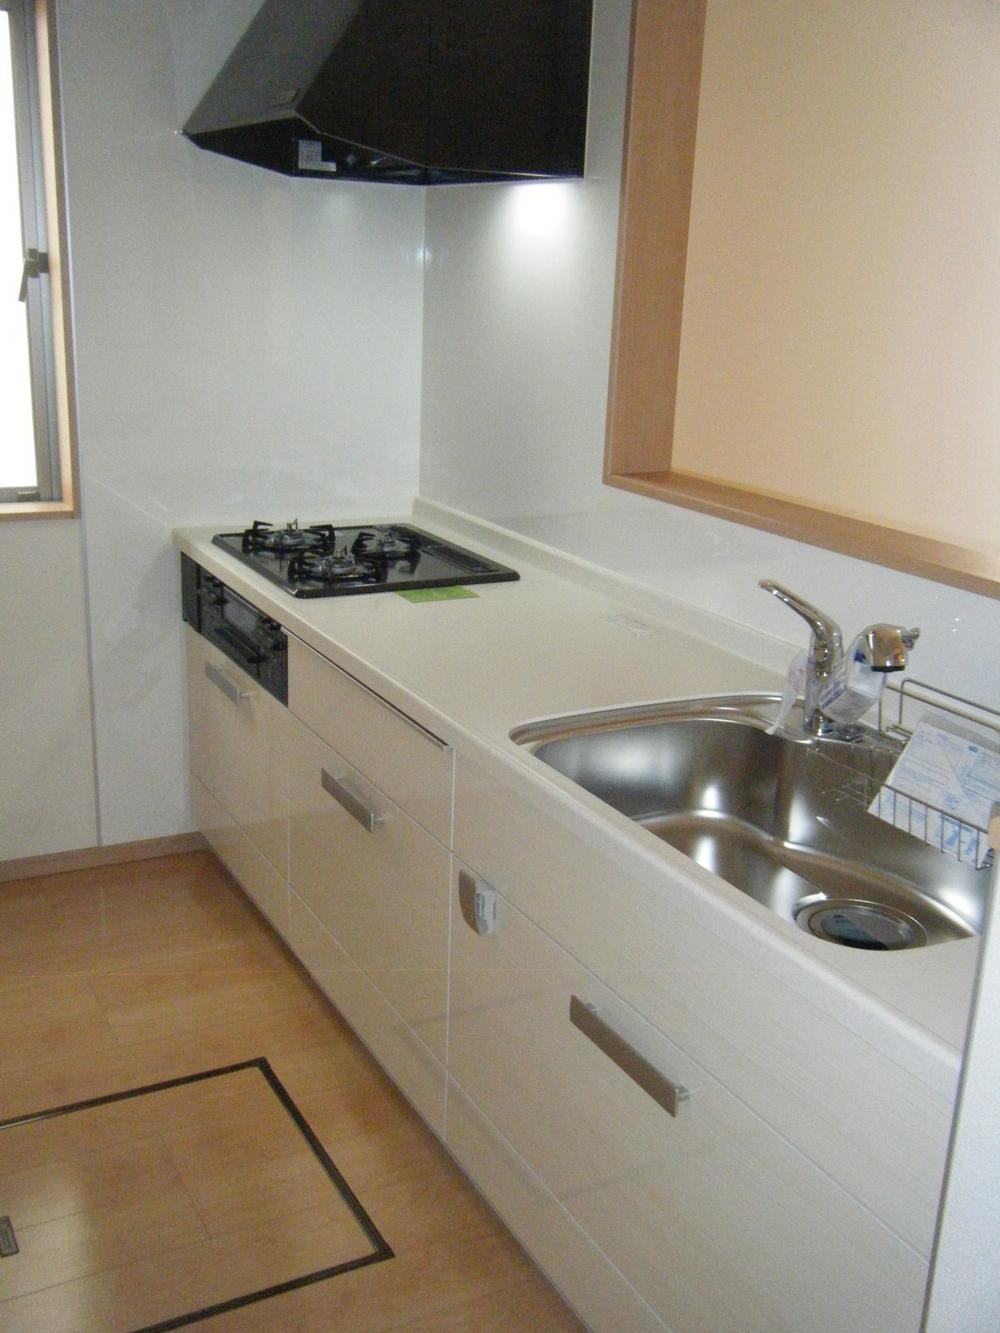 Same specifications photo (kitchen). Same specifications image